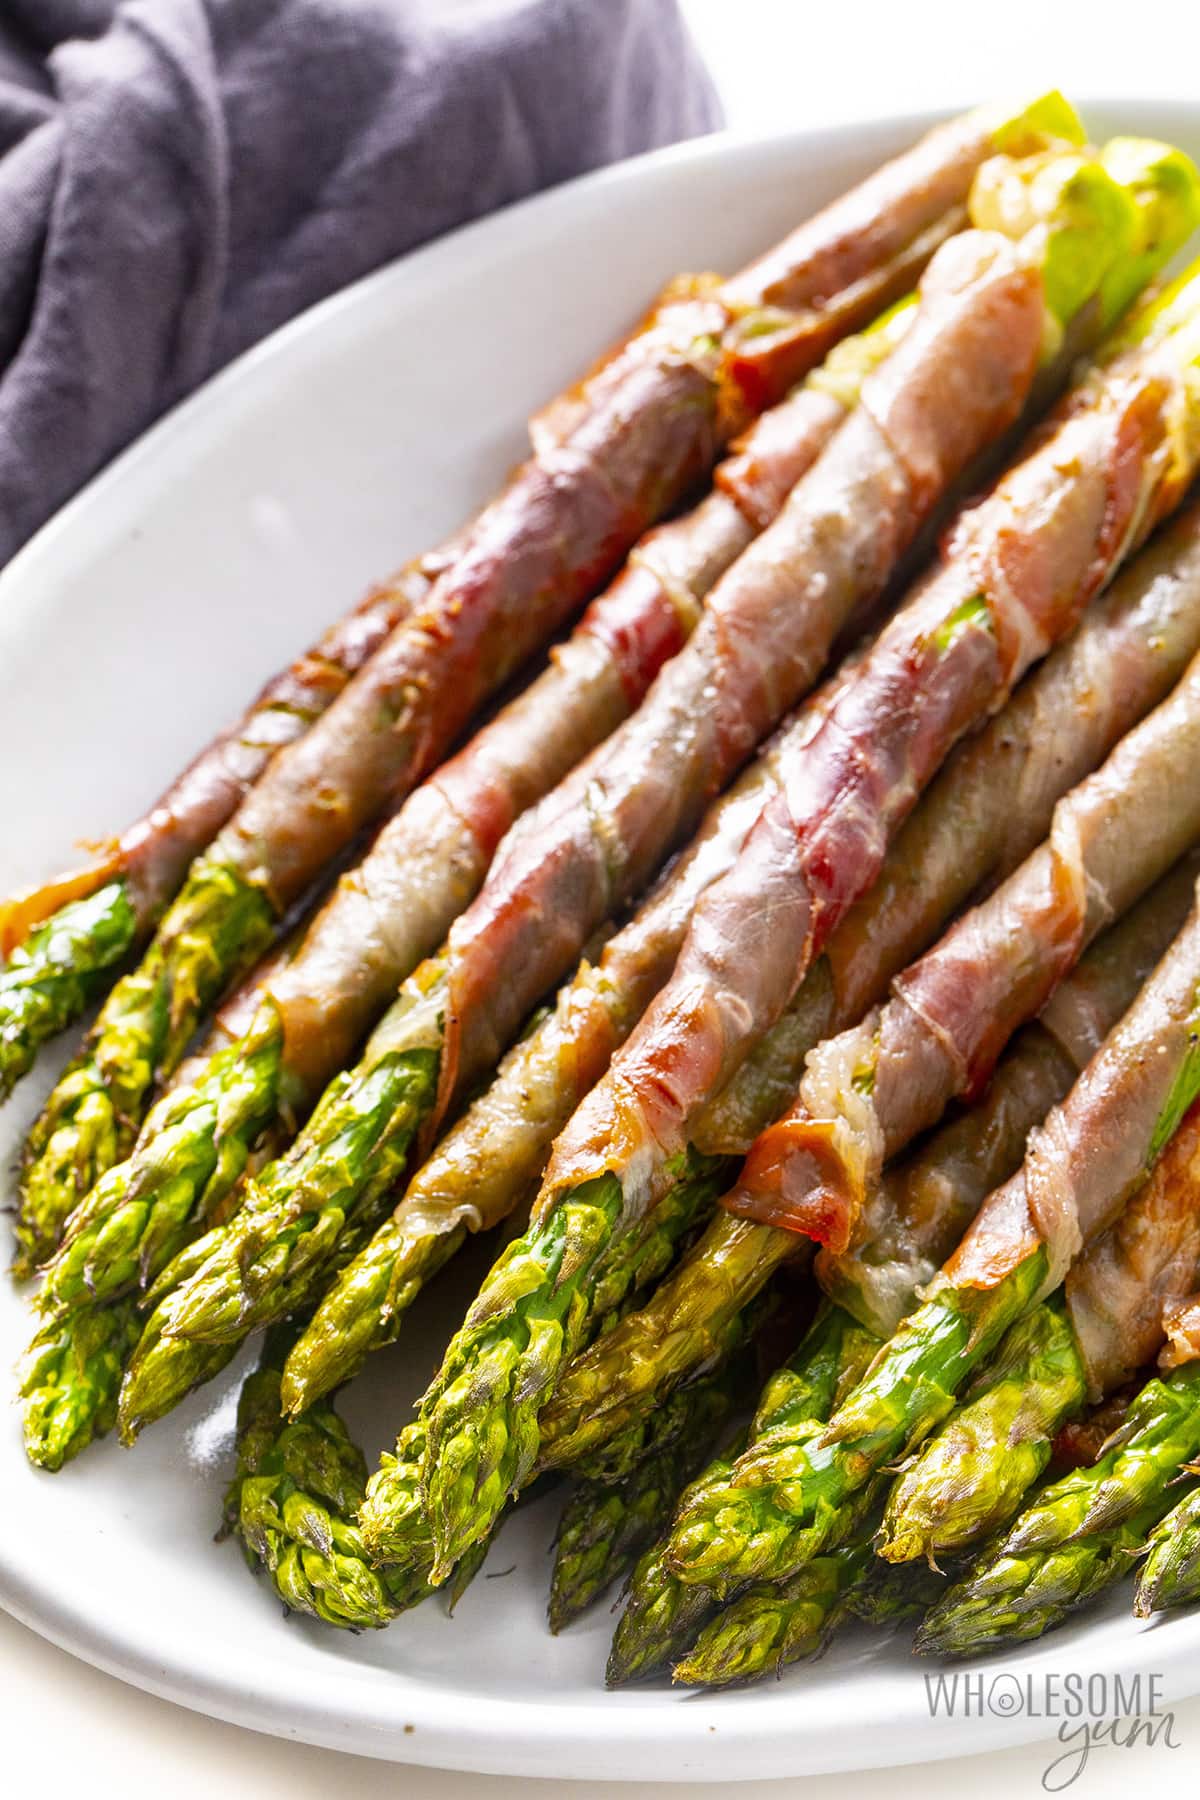 Asparagus appetizer on a plate.